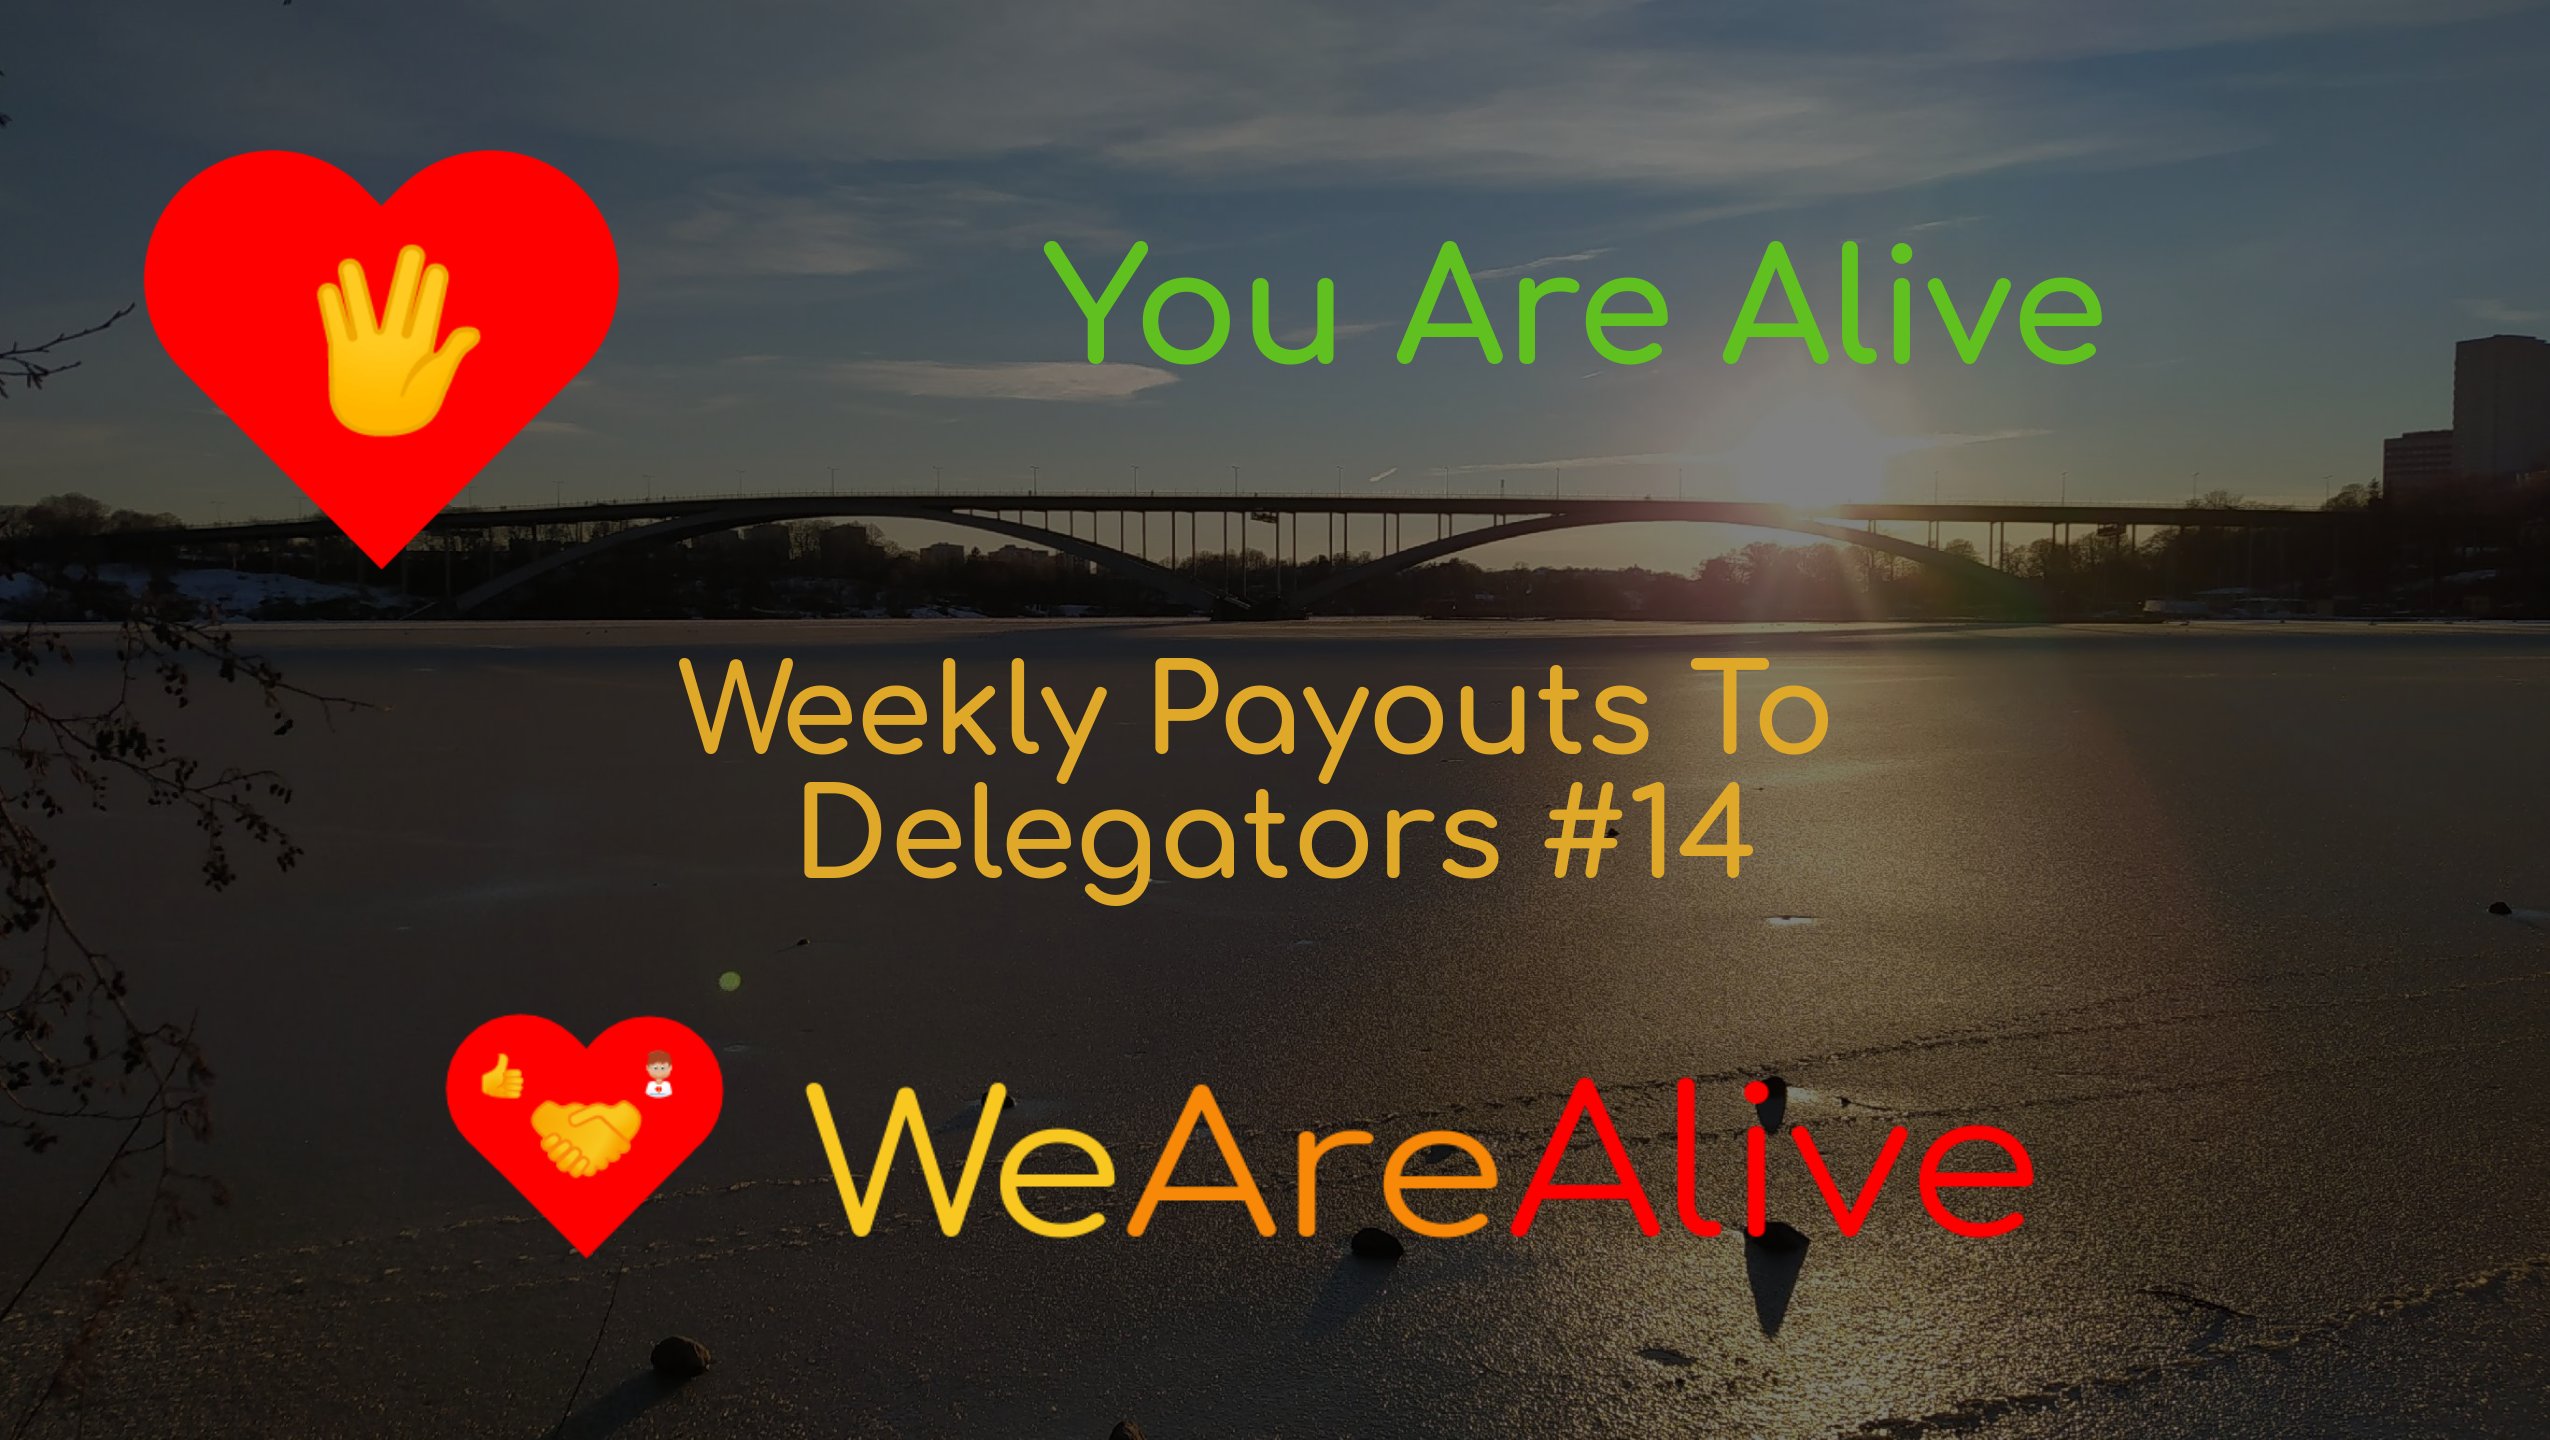 @youarealive/you-are-alive-weekly-payouts-to-delegators-14